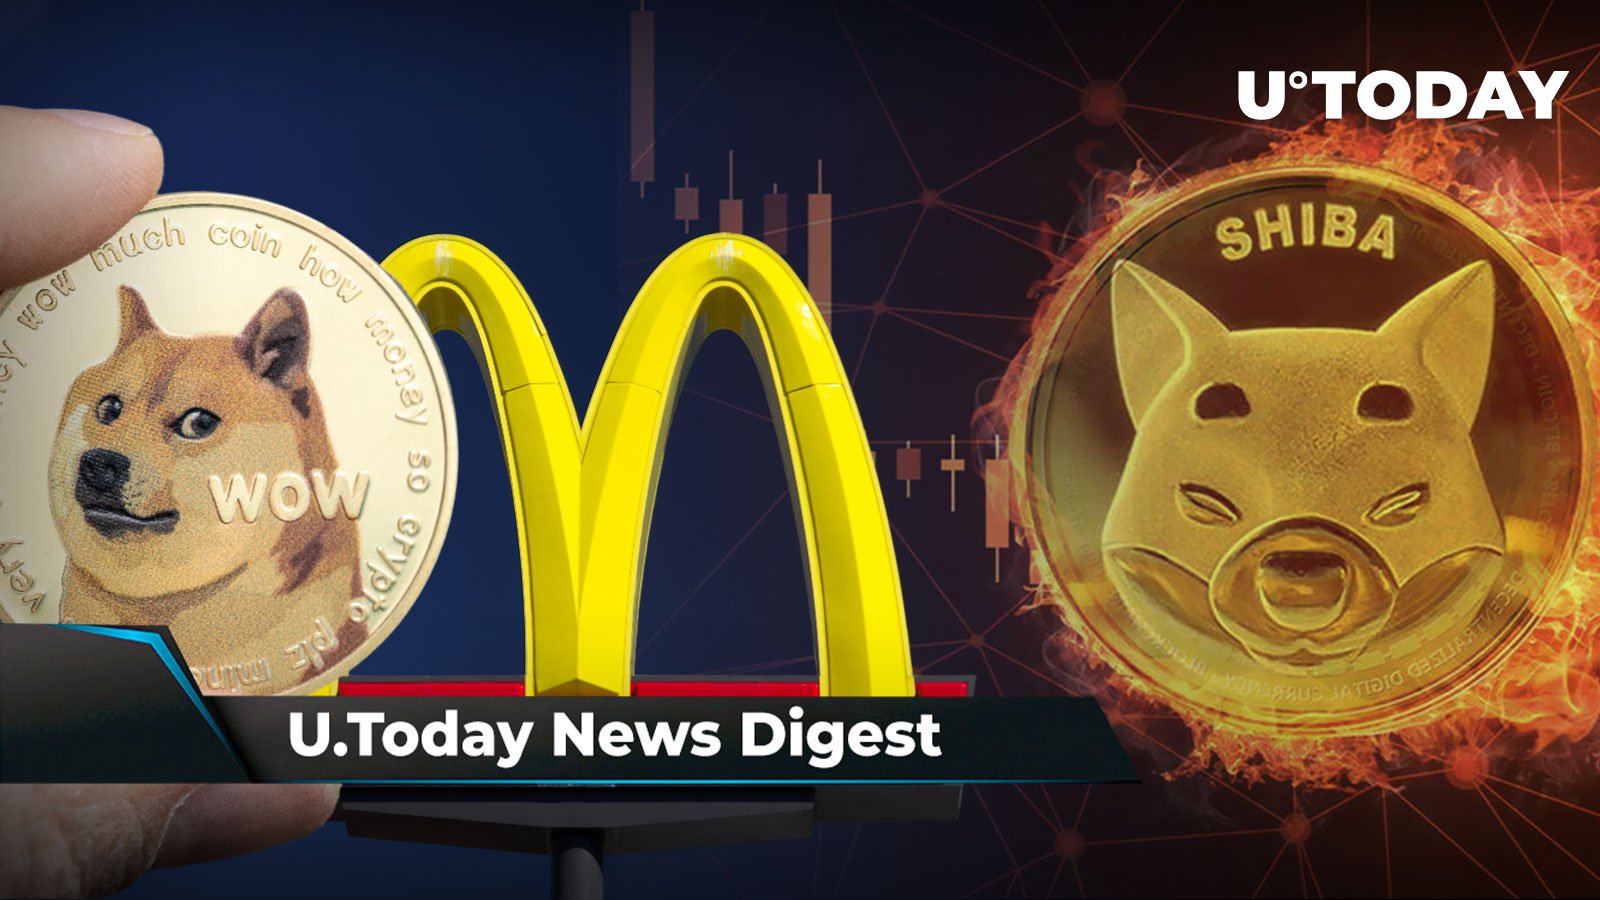 Ripple CTO Hints at Satoshi Nakamoto’s Identity, DOGE Army Stunned by McDonald’s Refusal to Go Viral, SHIB Burn Rate Drops Hard: Crypto News Digest by U.Today